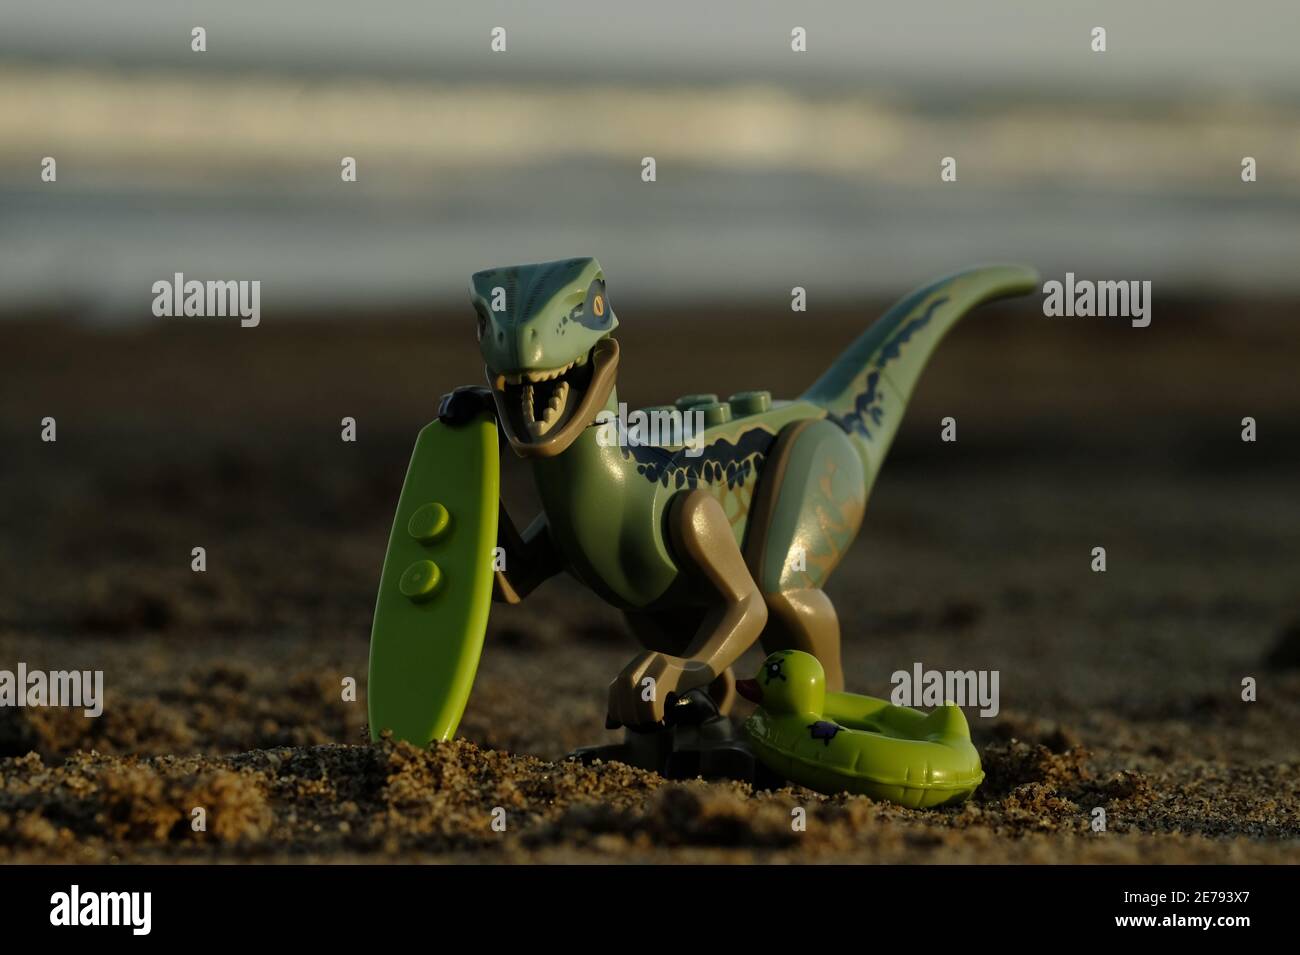 Indonesia, Sep 01 2018. Lego raptor on vacation, playing sand, swiming and surfing. Lego minifigures are manufactured by The Lego Group Stock Photo